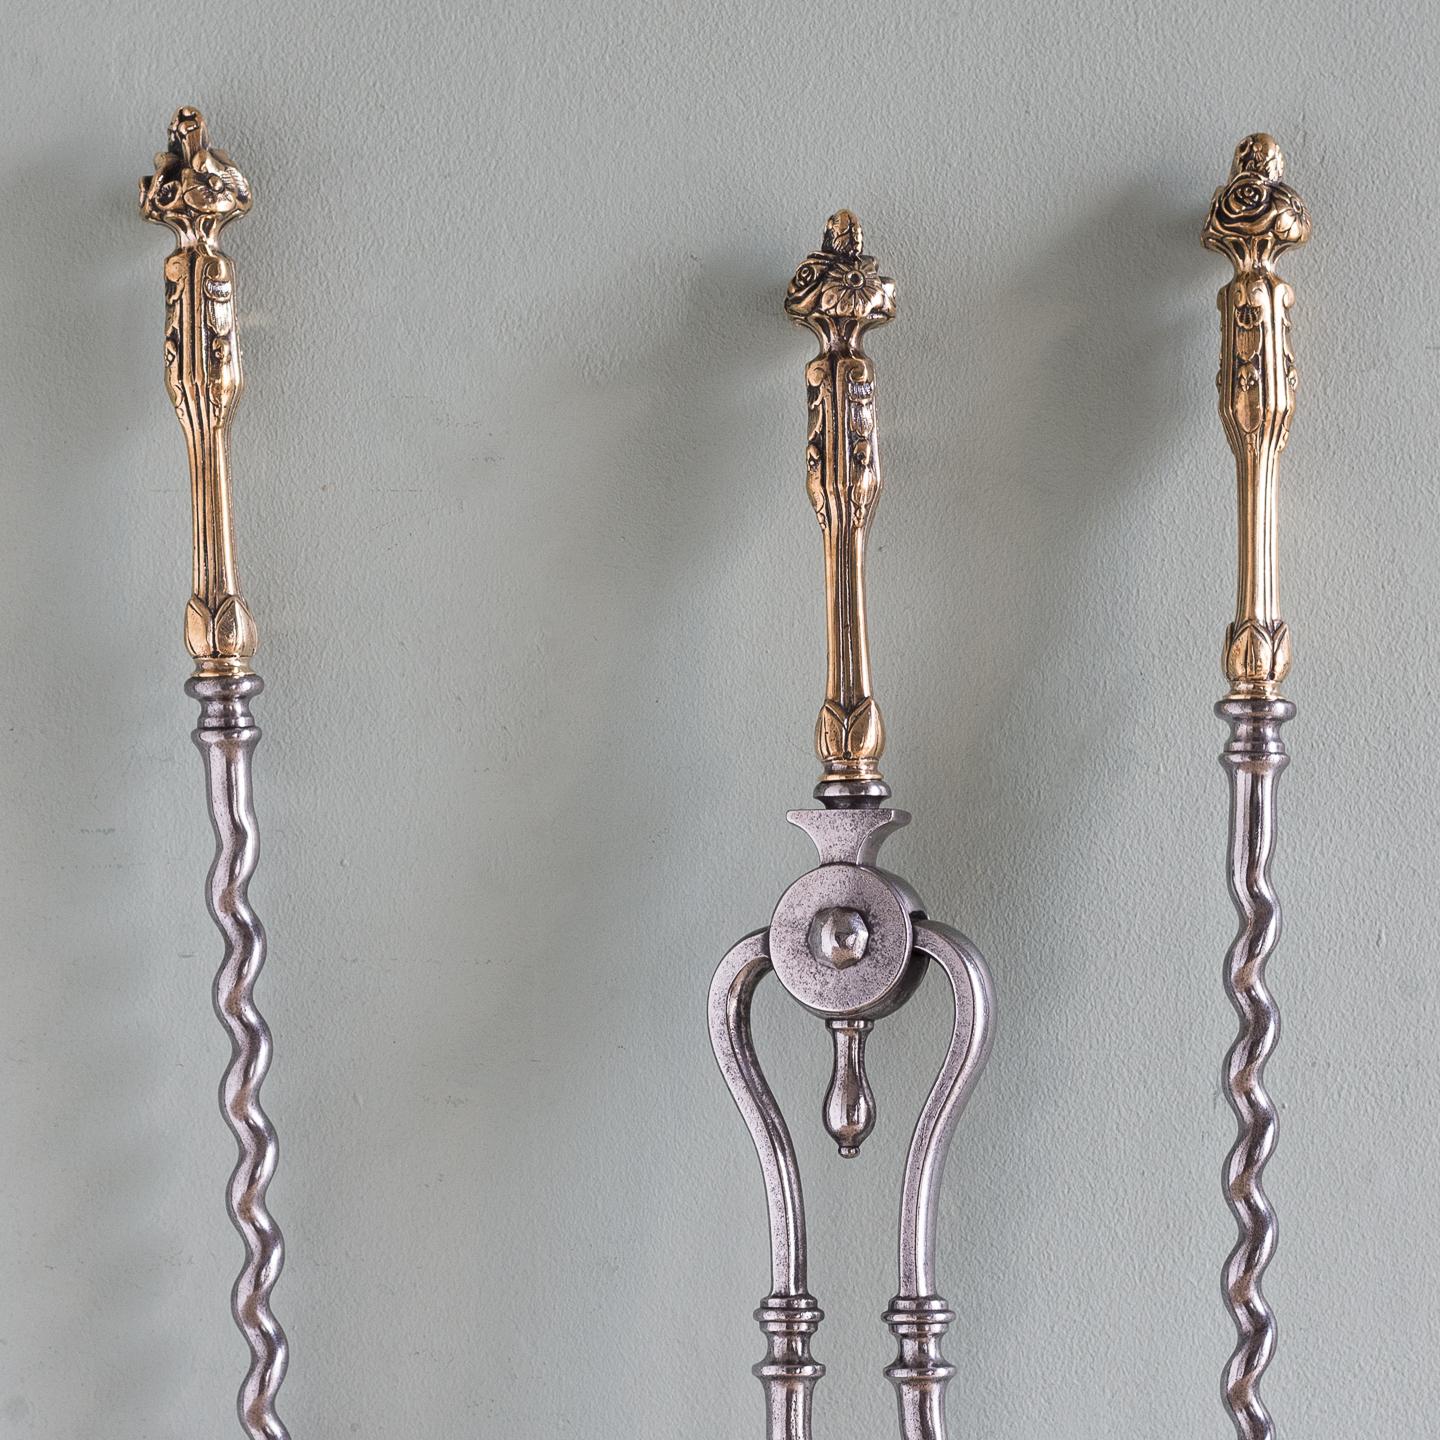 British Set of Mid-19th Century English Brass and Steel Fire Irons